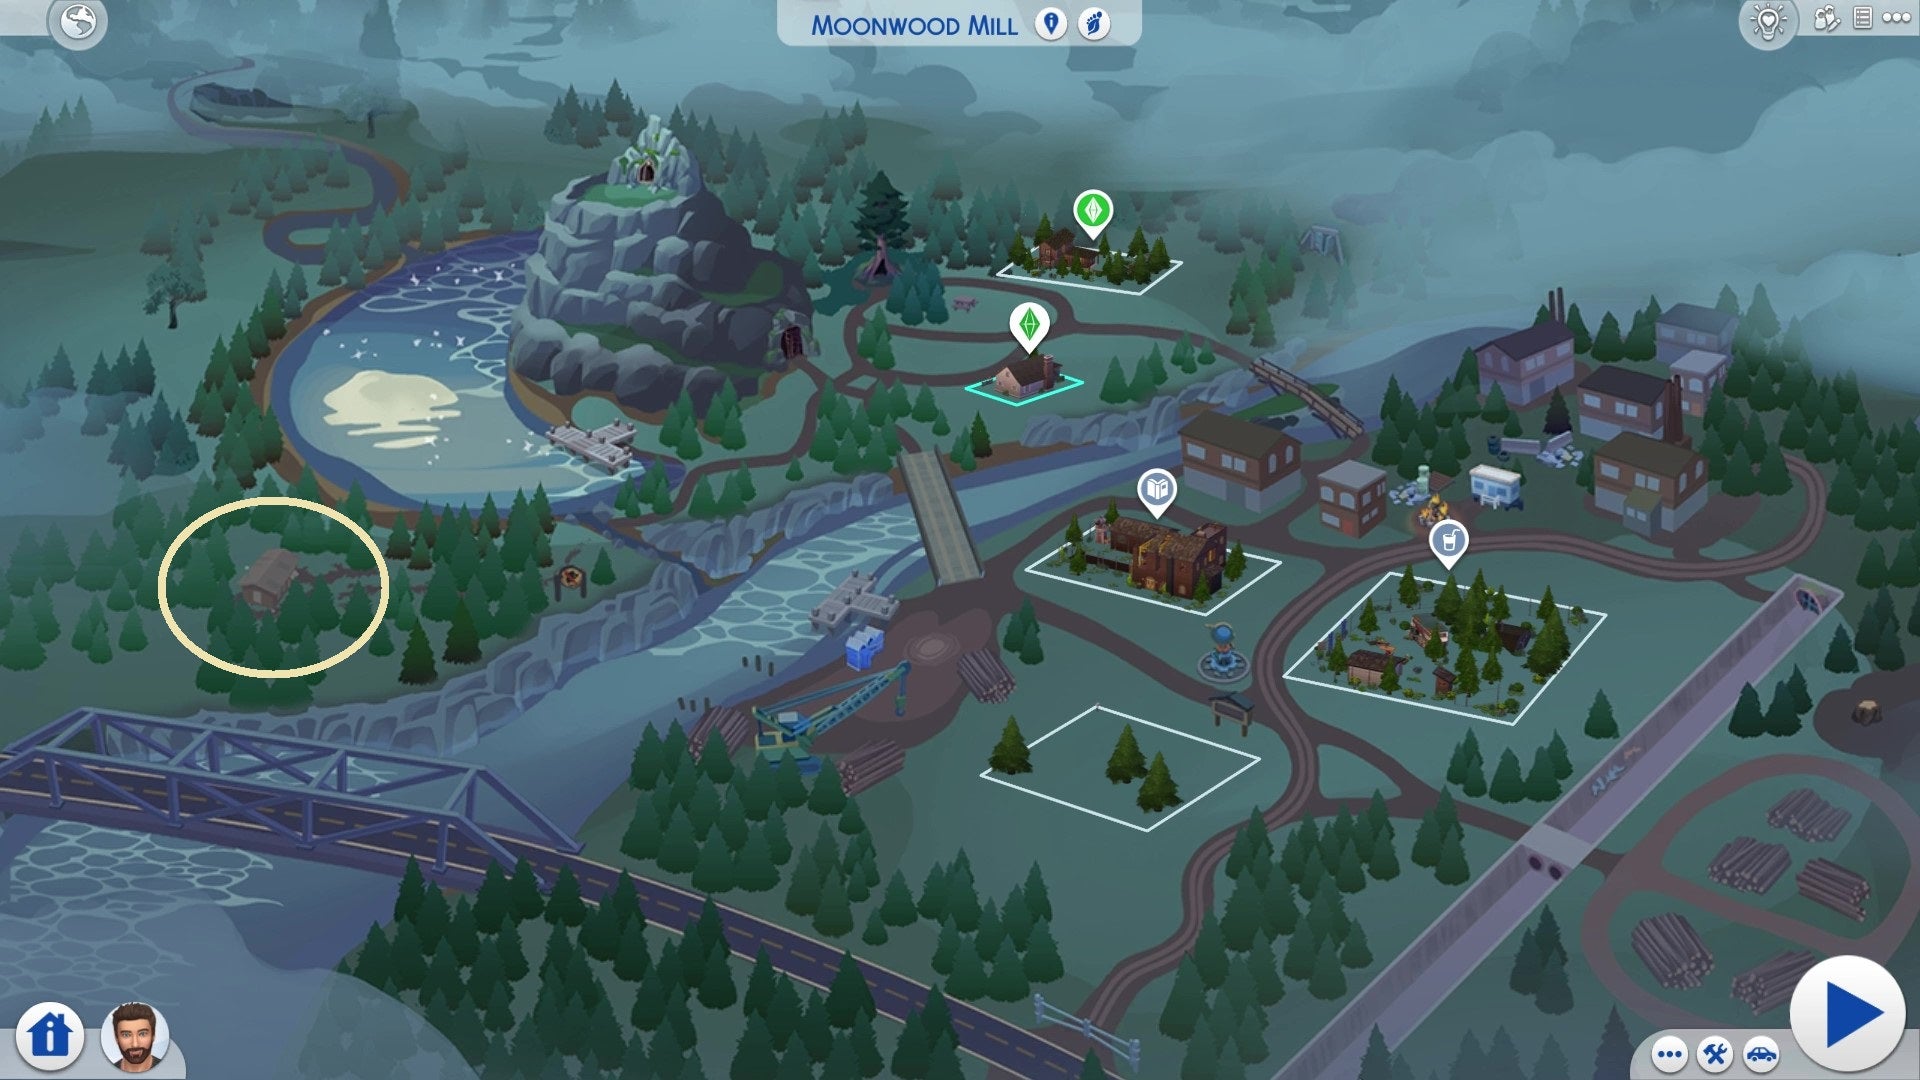 The Moonwood Mill map from The Sims 4 Werewolves, with Greg's house circled.